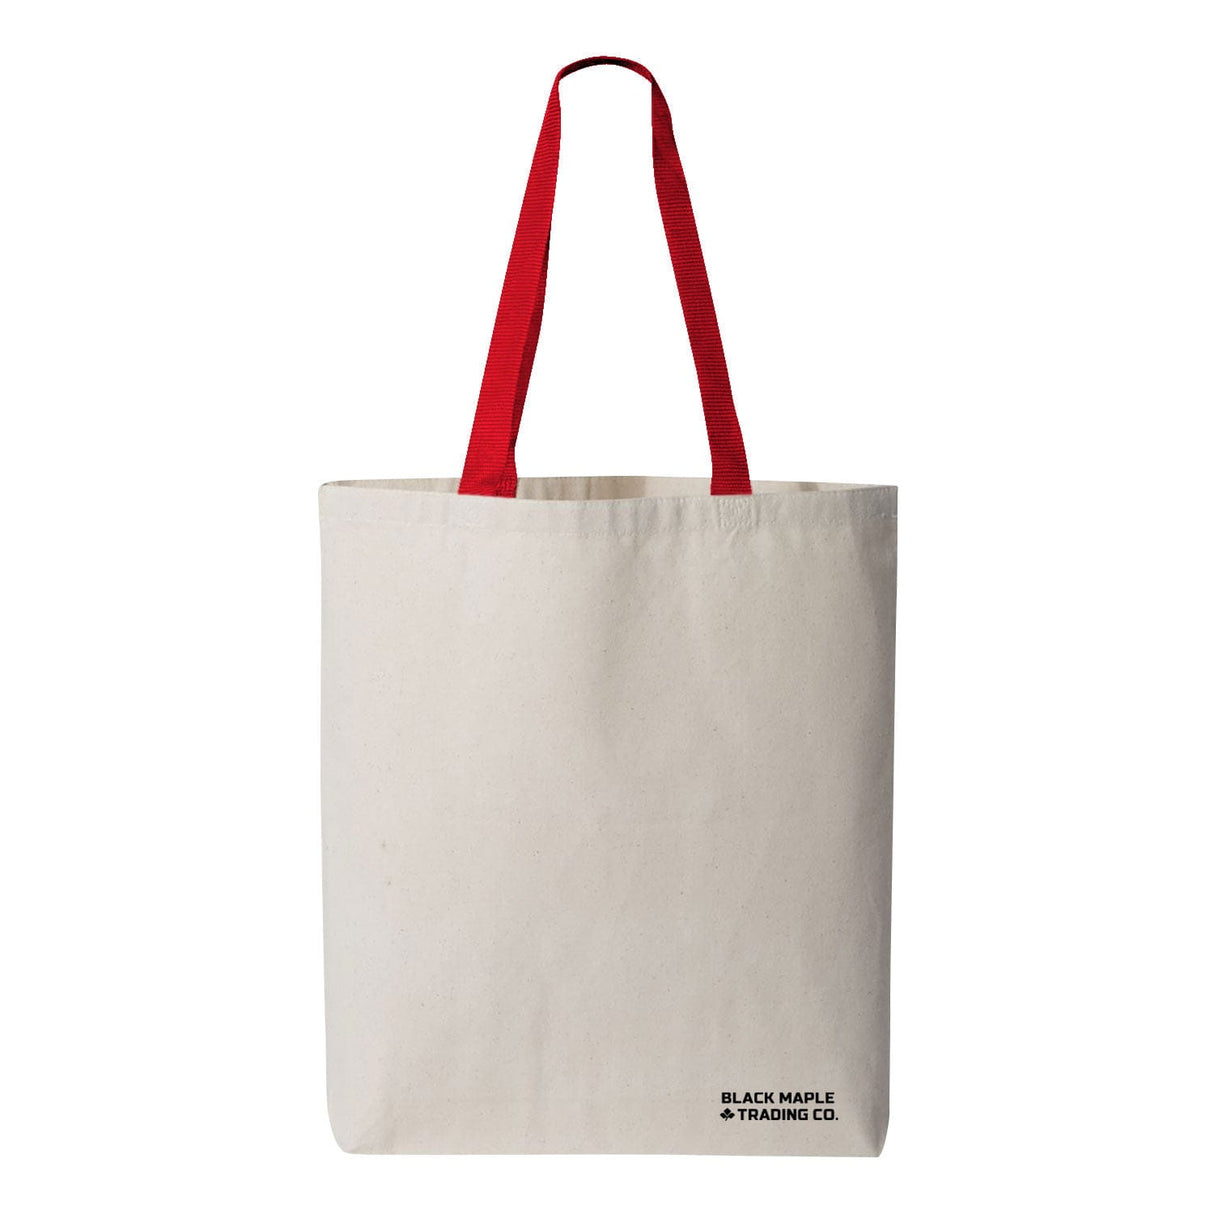 Retro D Grocery Store Tote Bag